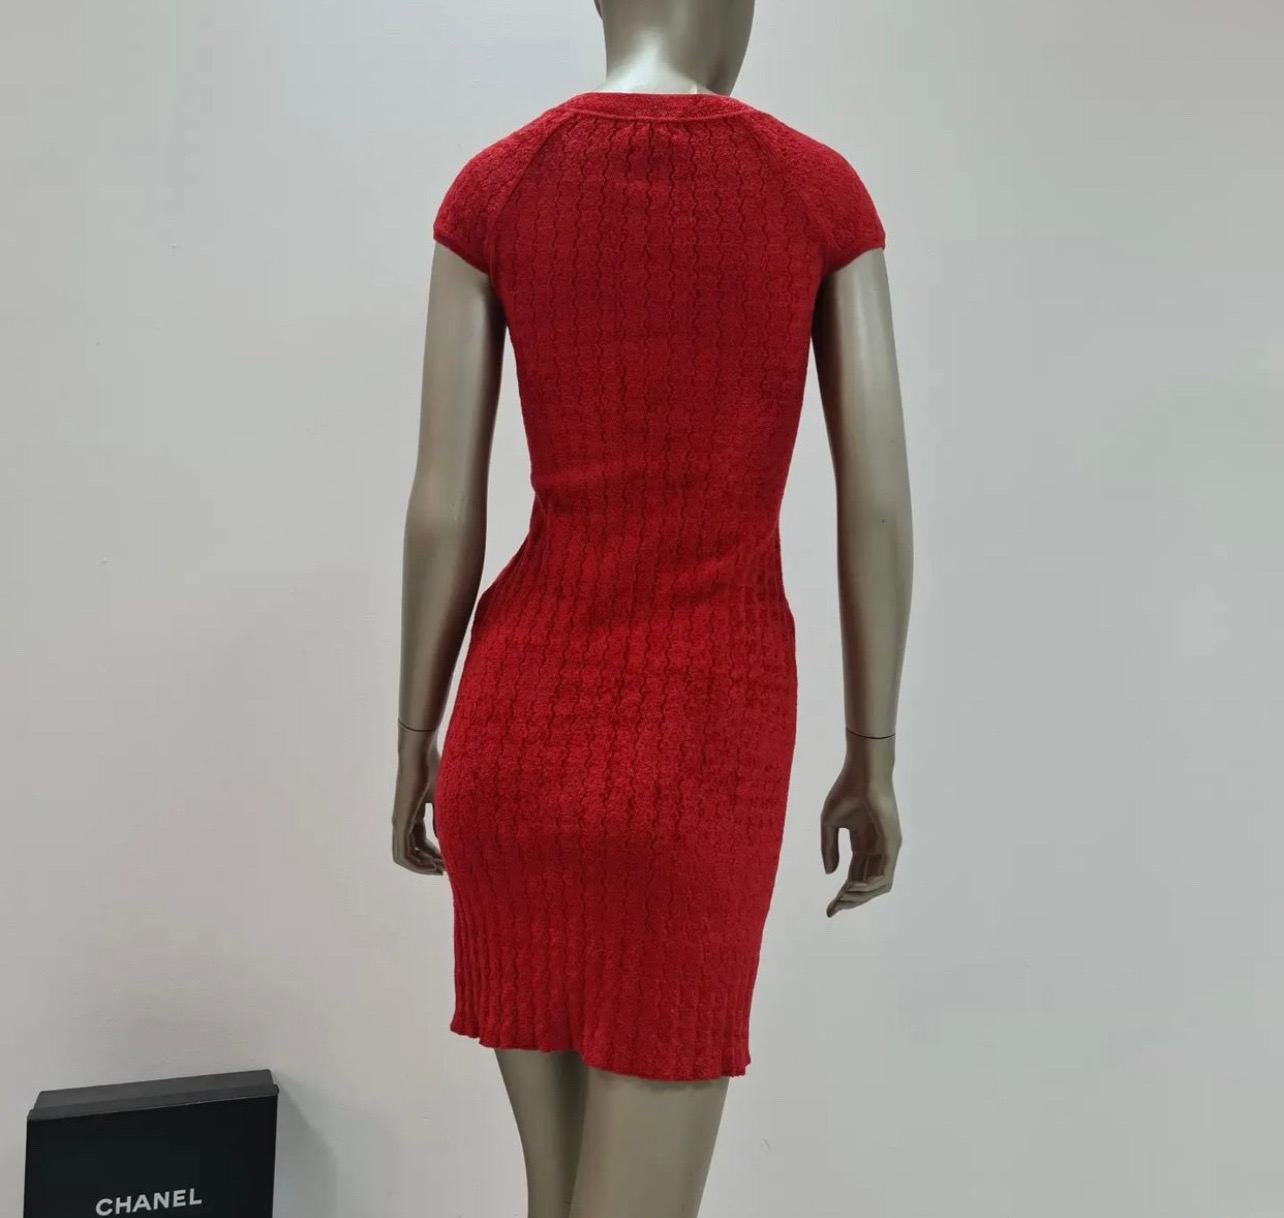 CHANEL Red 2010 SHANGHAI Knit Dress In Excellent Condition For Sale In Krakow, PL